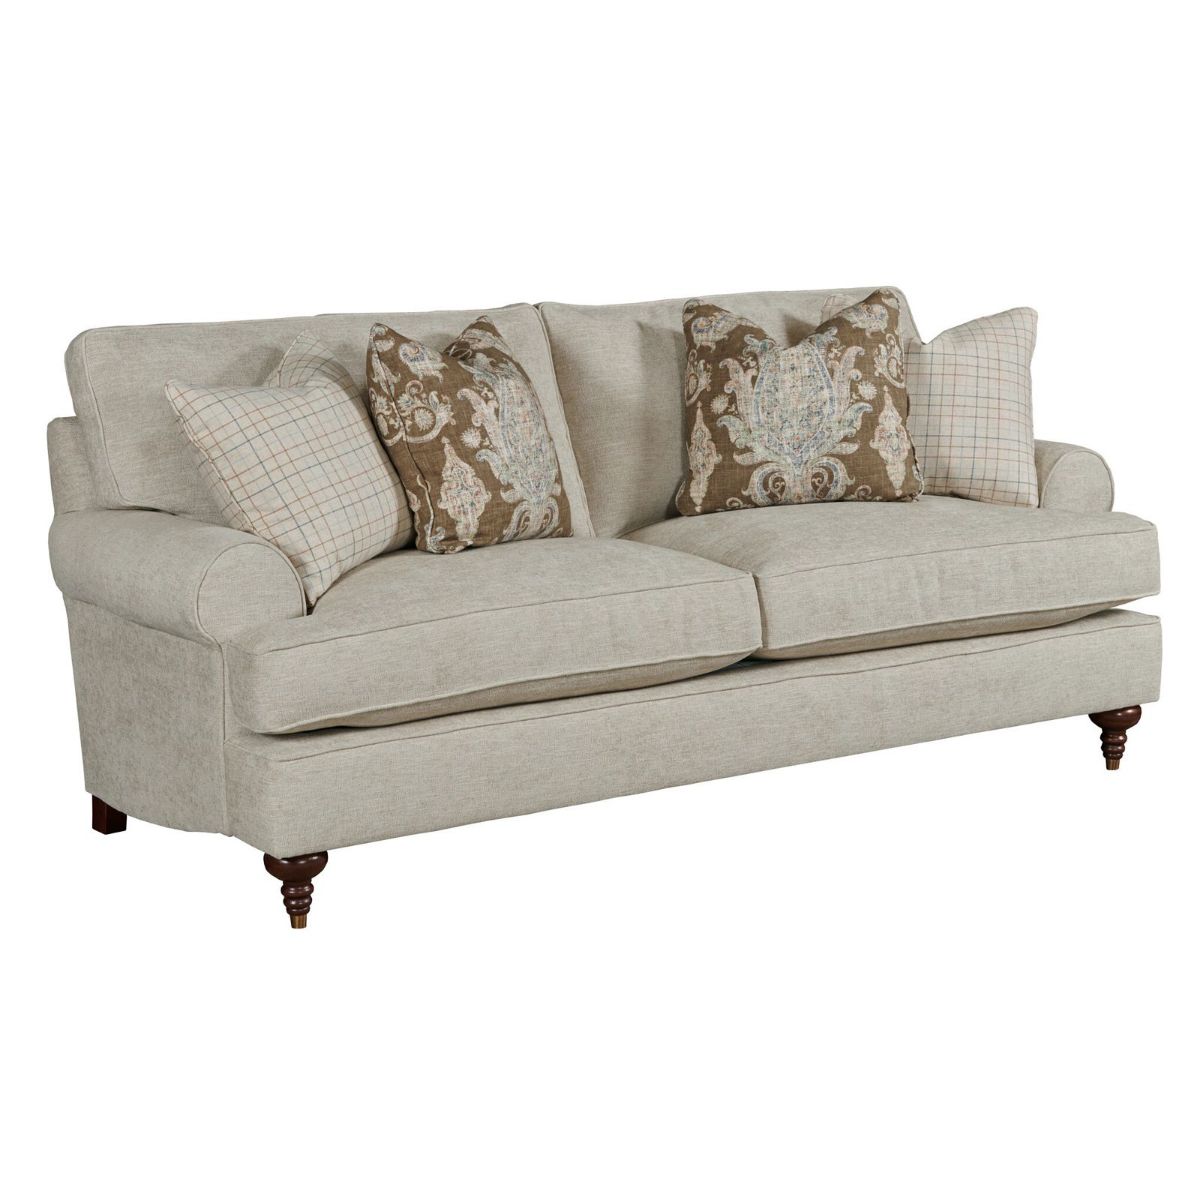 Picture of Tuscany Stationary Sofa